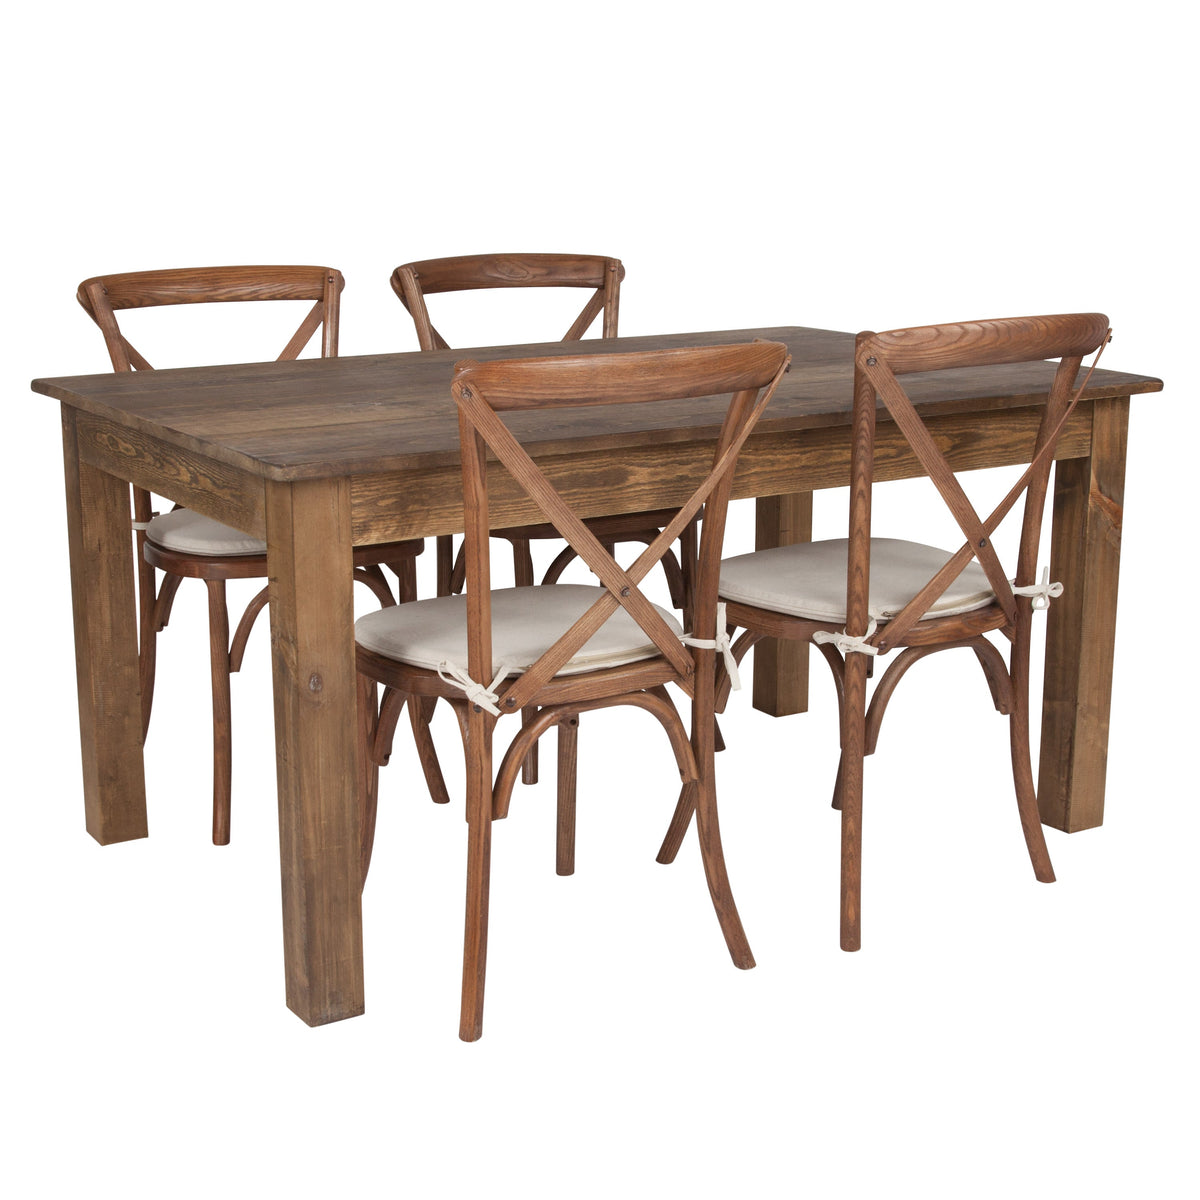 60inch x 38inch Antique Rustic Farm Table Set with 4 Cross Back Chairs and Cushions